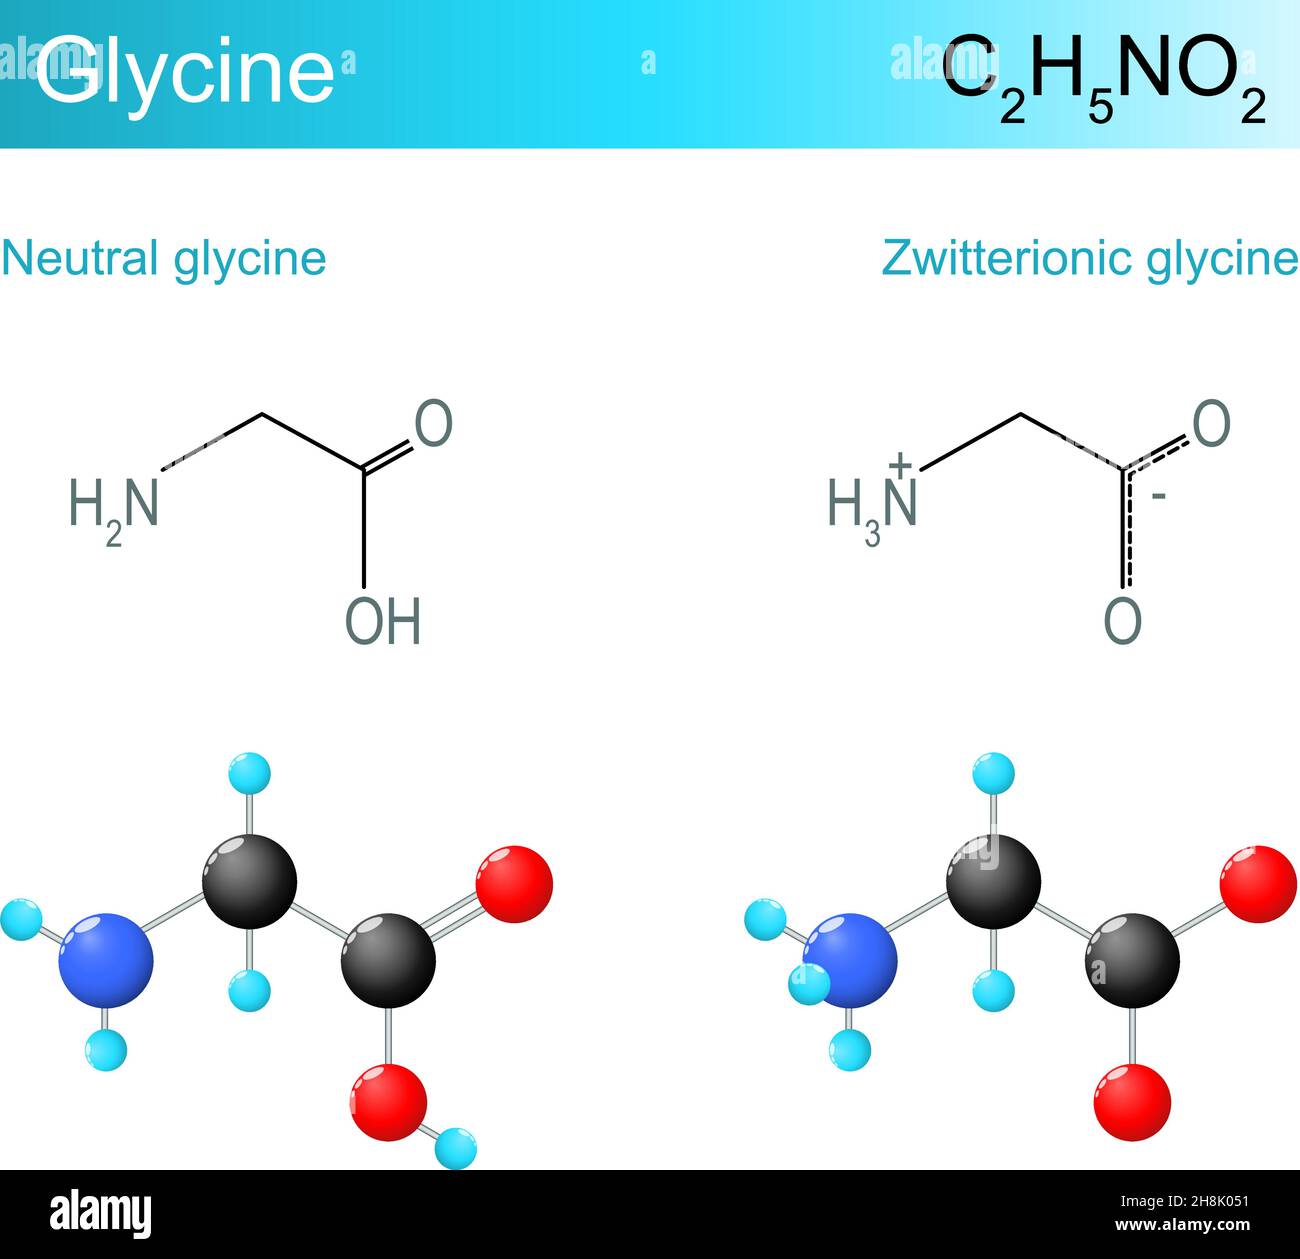 Glycine molecular formula. neutral glycine and zwitterionic glycine. Chemical structural formula and model of a simplest stable amino acid. Vector ill Stock Vector